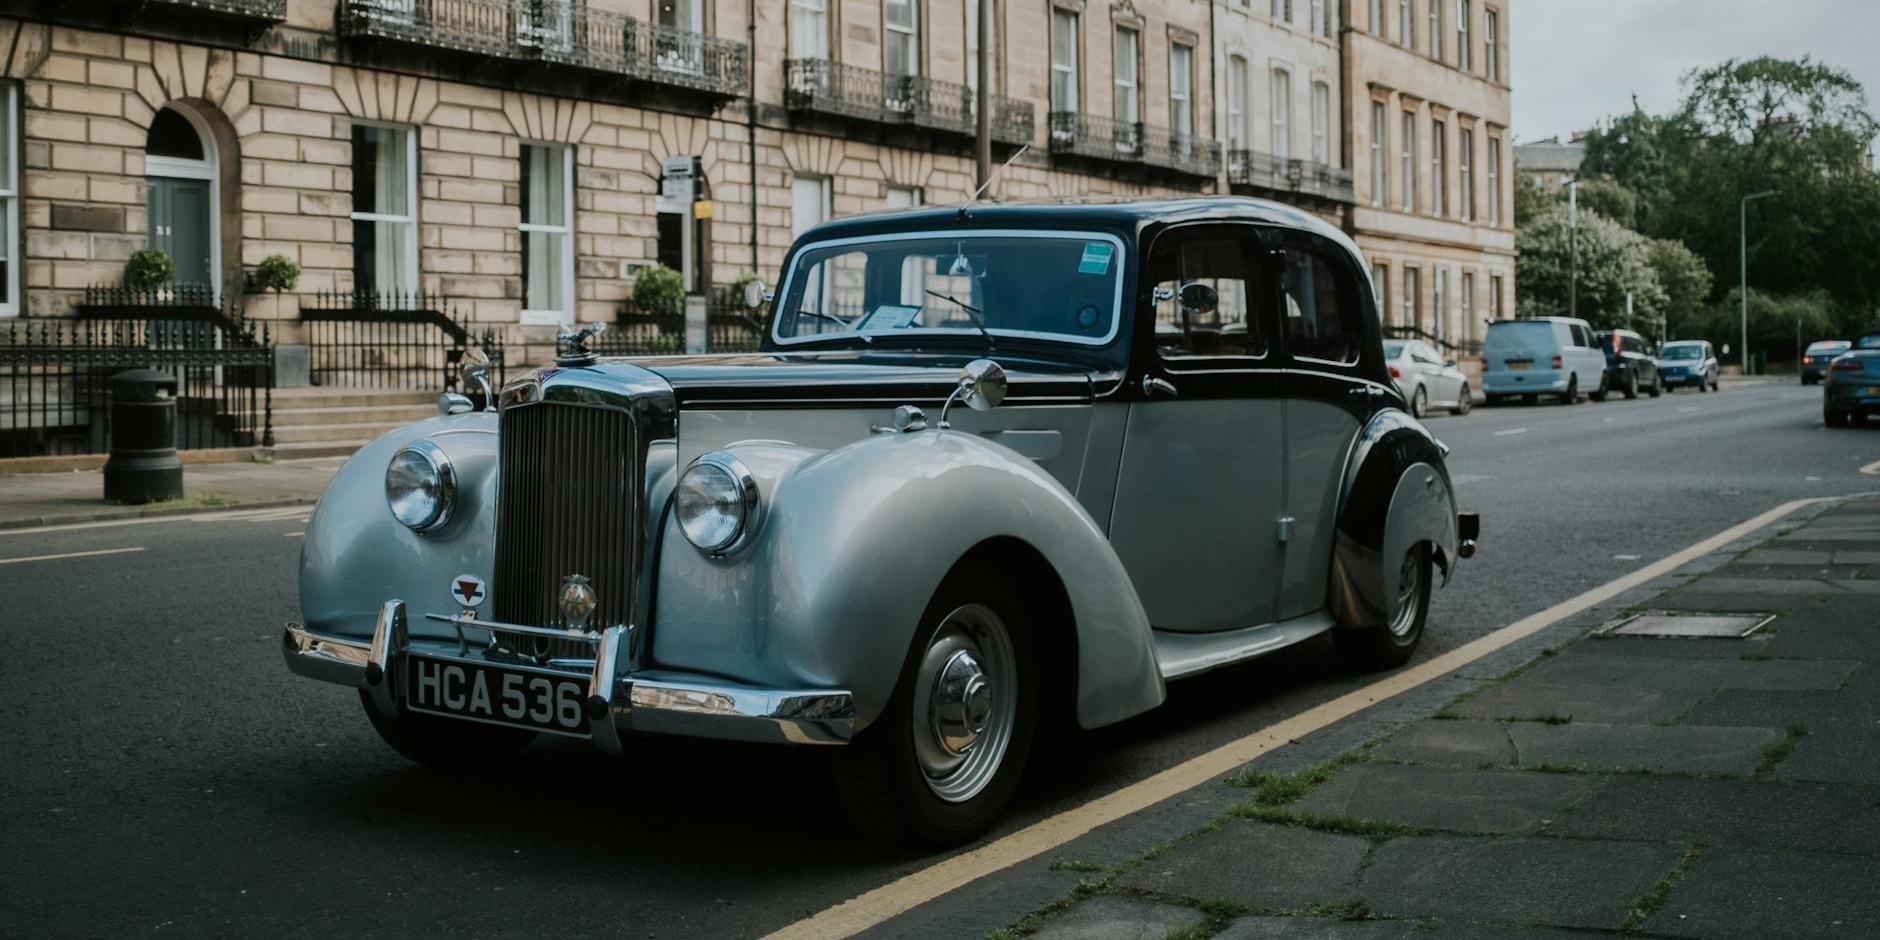 The Ultimate Guide to Coordinating Your Wedding Transportation in Holyhead